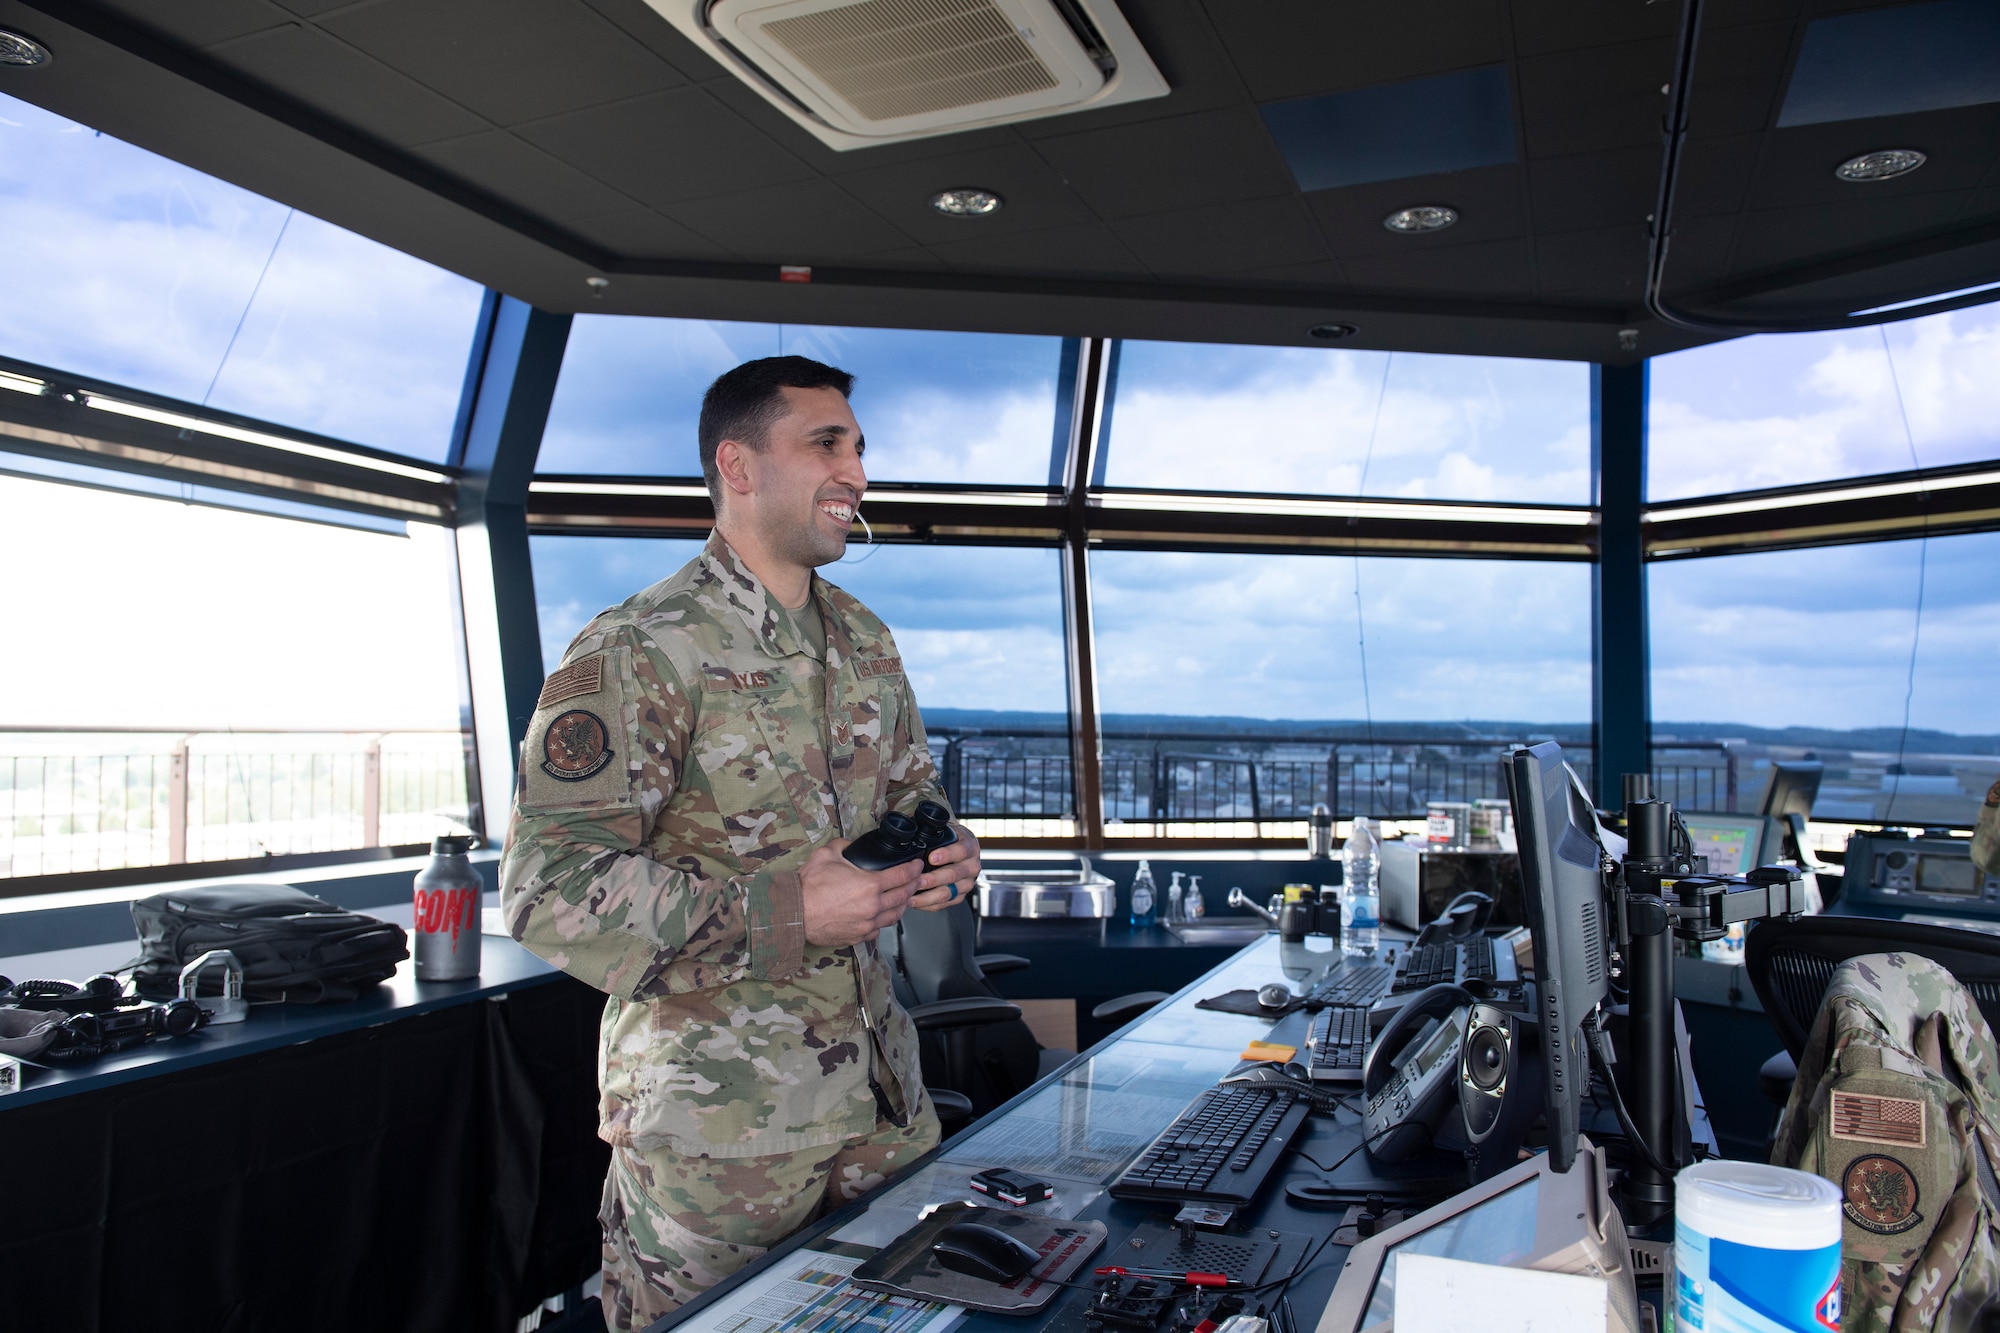 U.S. Air Force Tech. Sgt Erron Sayas, 52nd Operational Support Squadron air traffic control watch supervisor, looks out of the air traffic control tower at Spangdahlem Air Base, Germany, July 17, 2020. Sayas earned a nomination for the Chainbreaker Award for his actions in preventing a disaster on the flightline between a C-17 Globemaster III and a flightline sweeper vehicle. (U.S. Air Force photo by Airman 1st Class Alison Stewart)